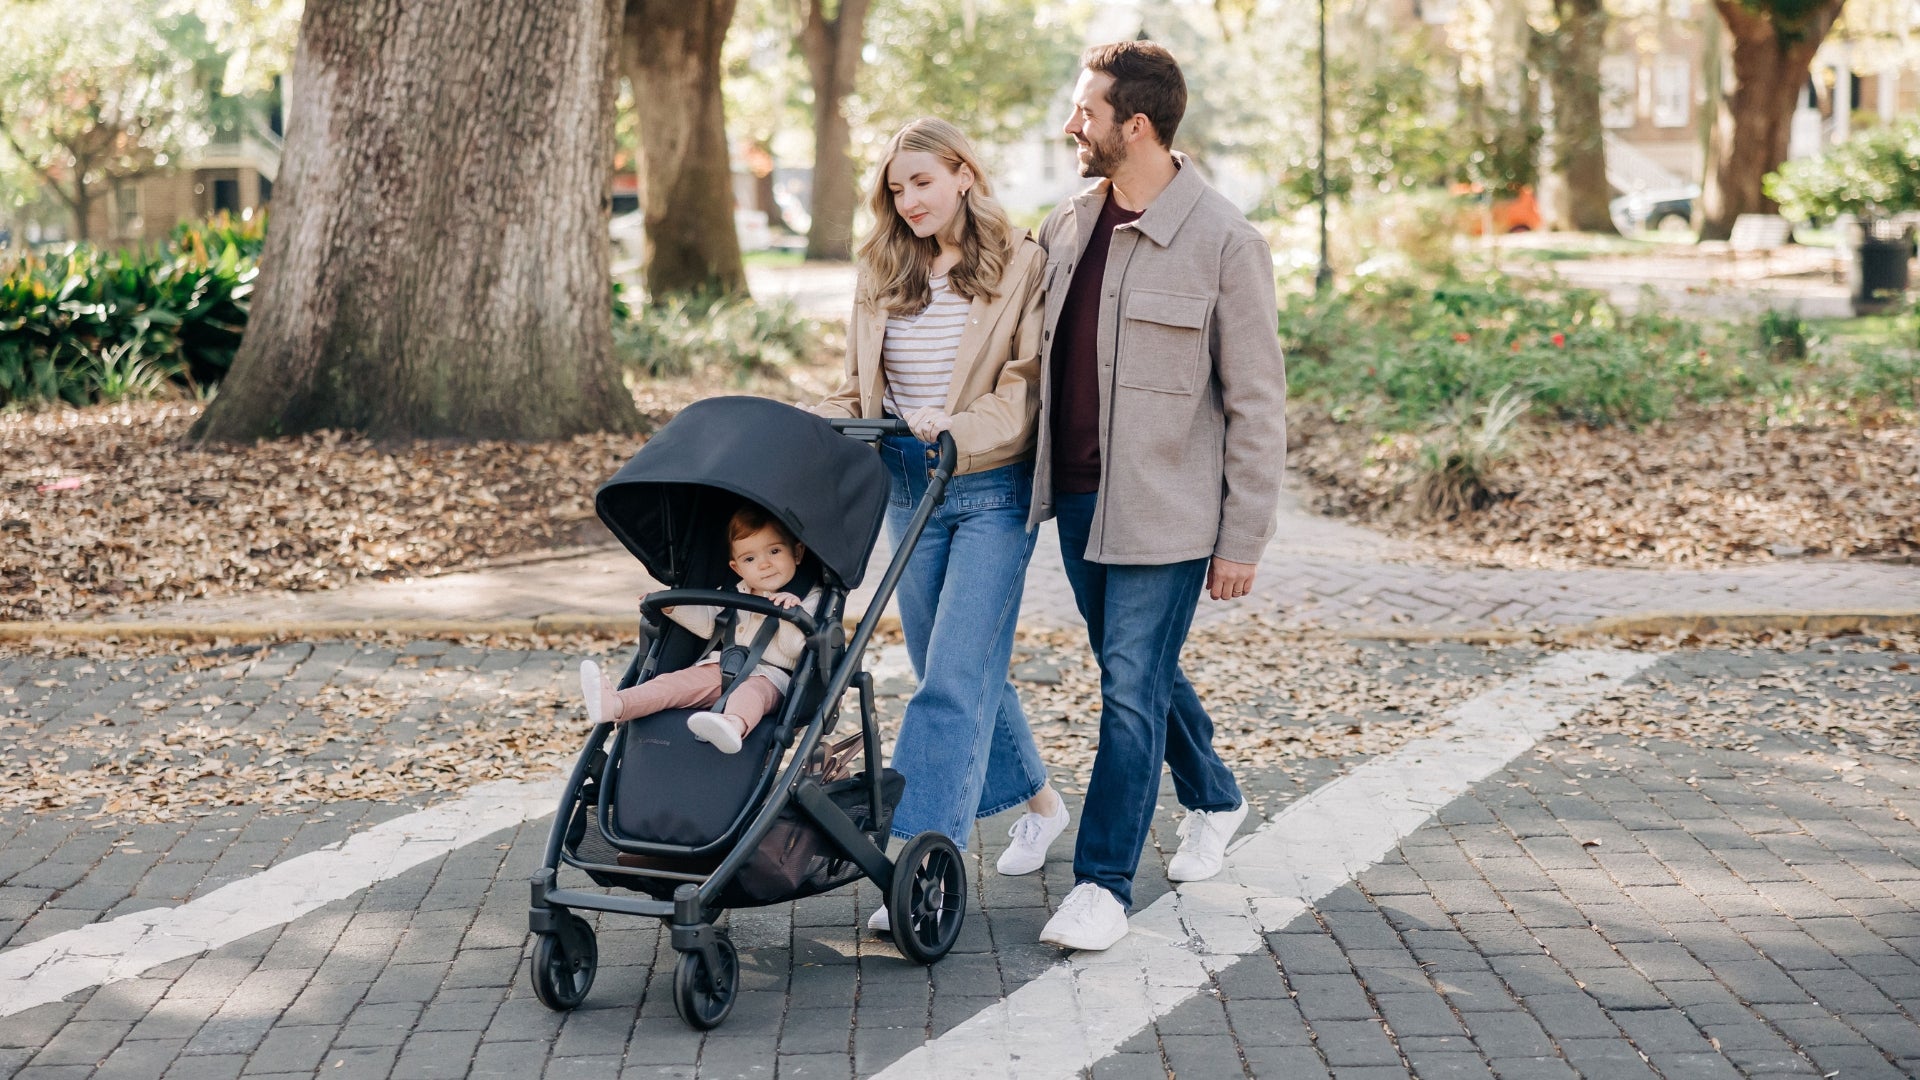 When does the UPPAbaby Cruz go on sale?